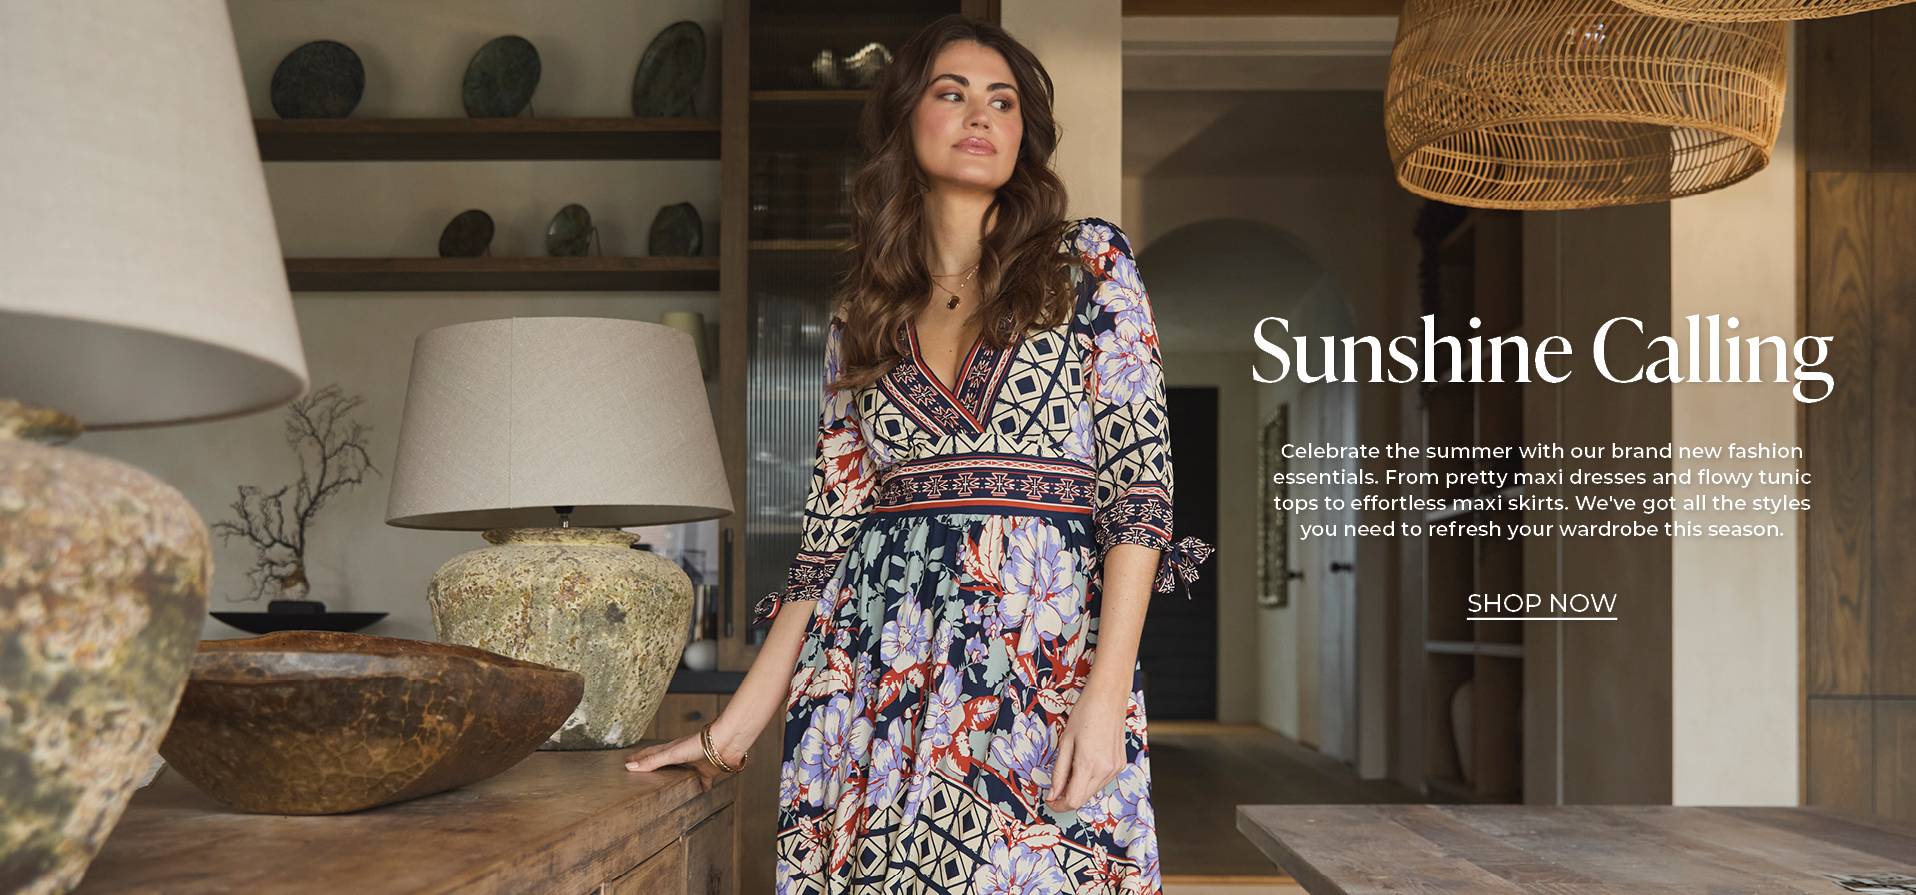 Celebrate the summer with our brand new fashion essentials. From pretty maxi dresses and flowy tunic tops to effortless maxi skirts. We've got all the styles you need to refresh your wardrobe this season.